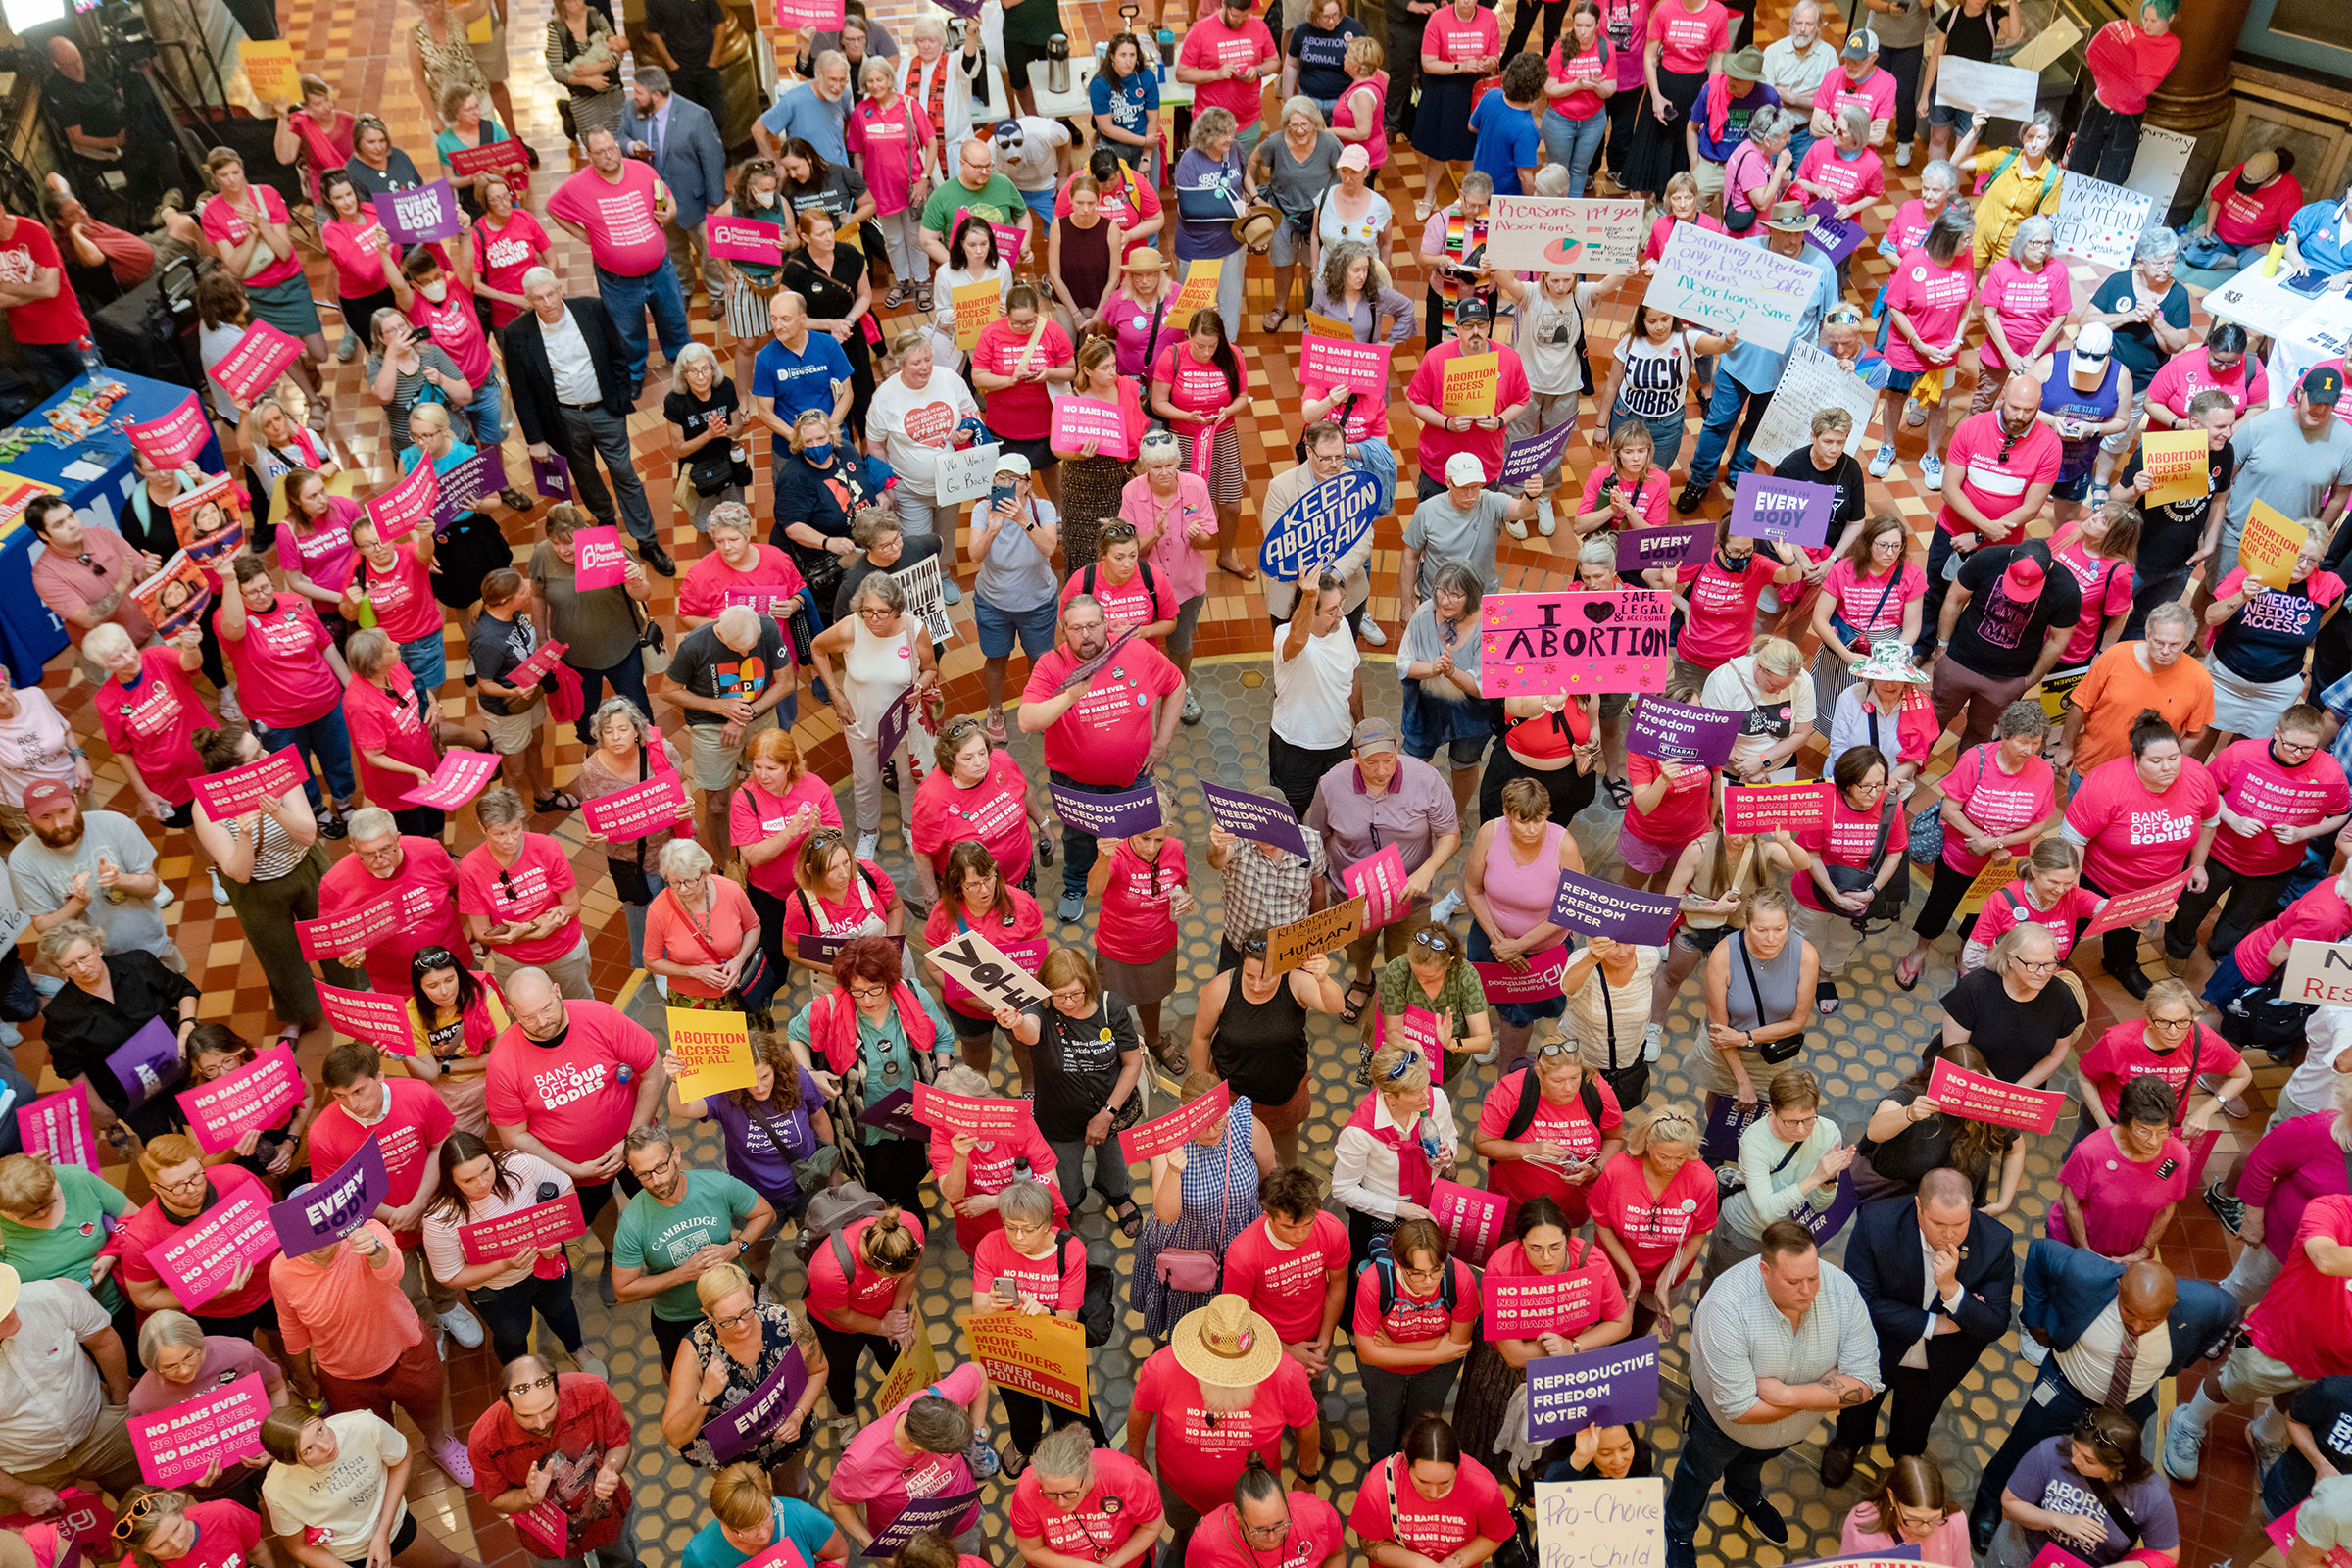 Protestors hold a rally for reproductive rights in the Iowa State Capitol rotunda as the Iowa Legislature convenes for special